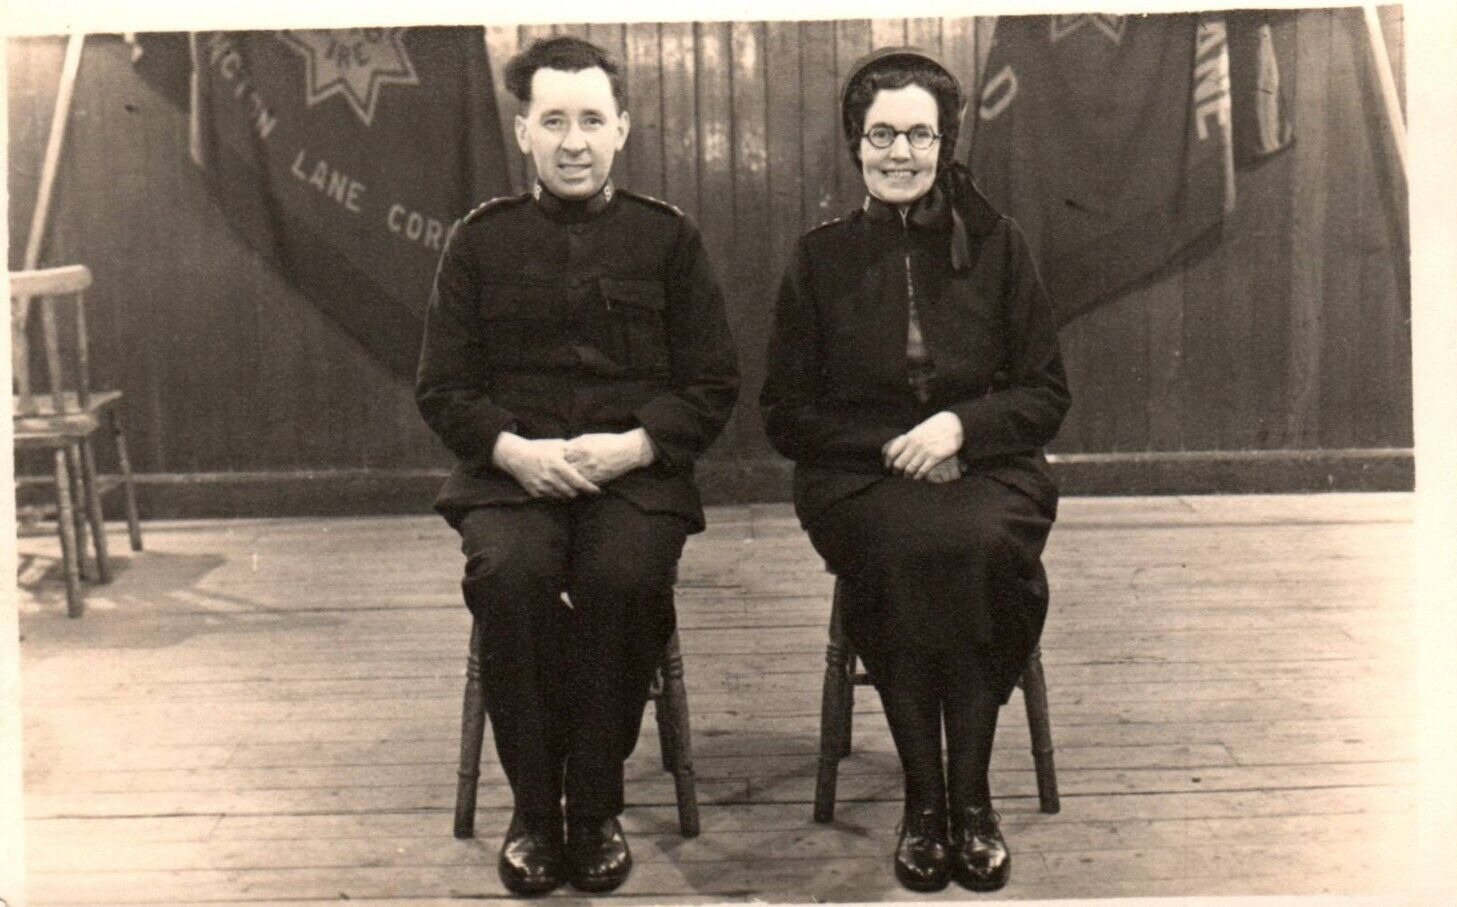 Salvation Army Capt. Riddle and Wife Vintage Postcard